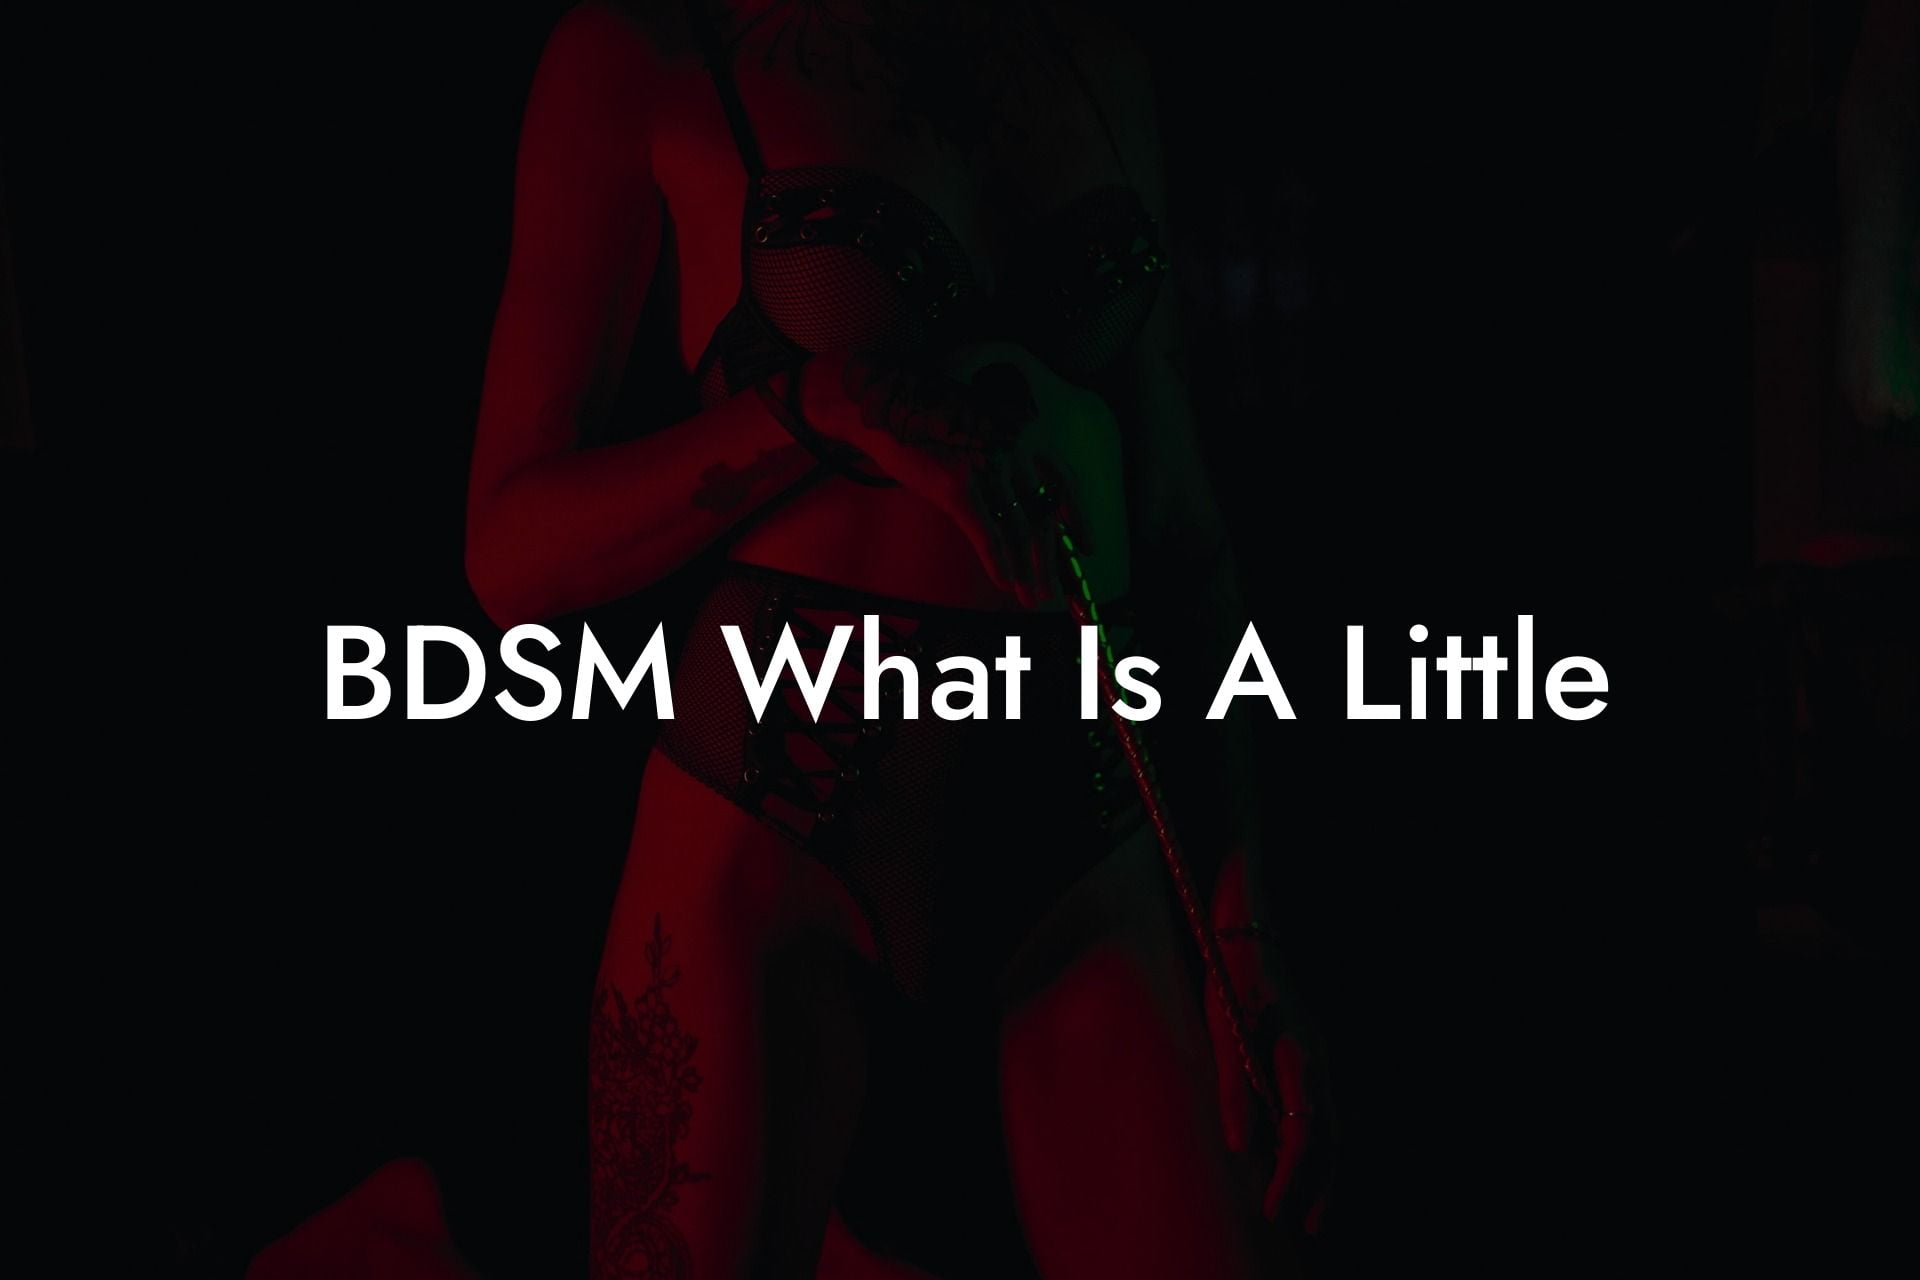 BDSM What Is A Little